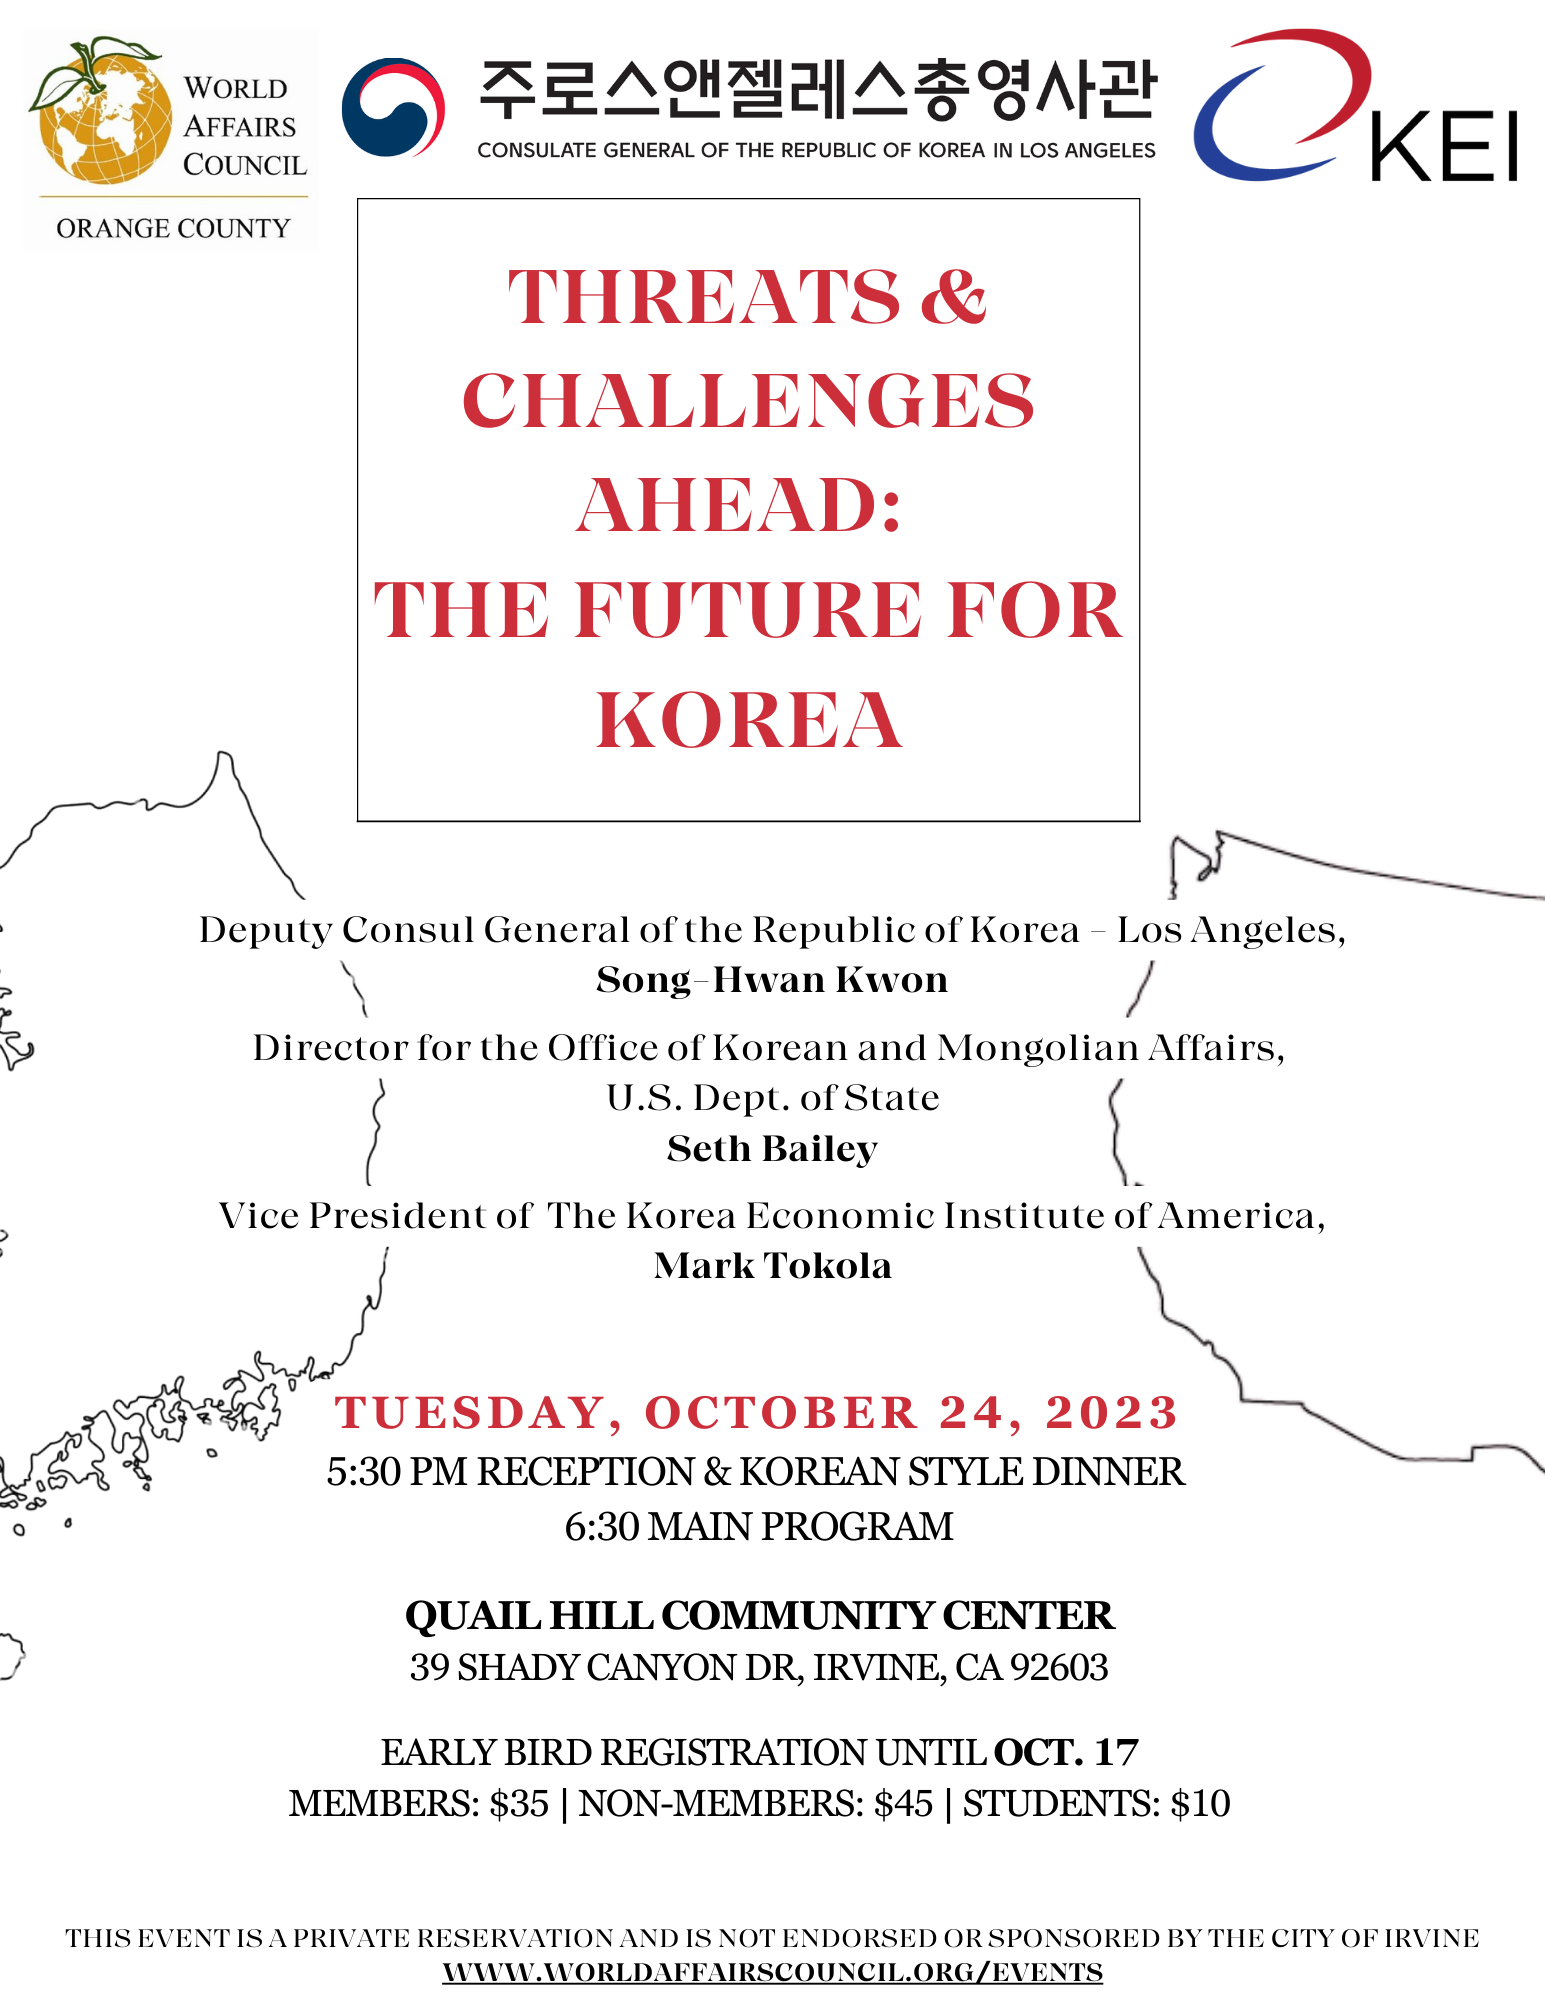 Threats & Challenges Ahead: The Future for Korea